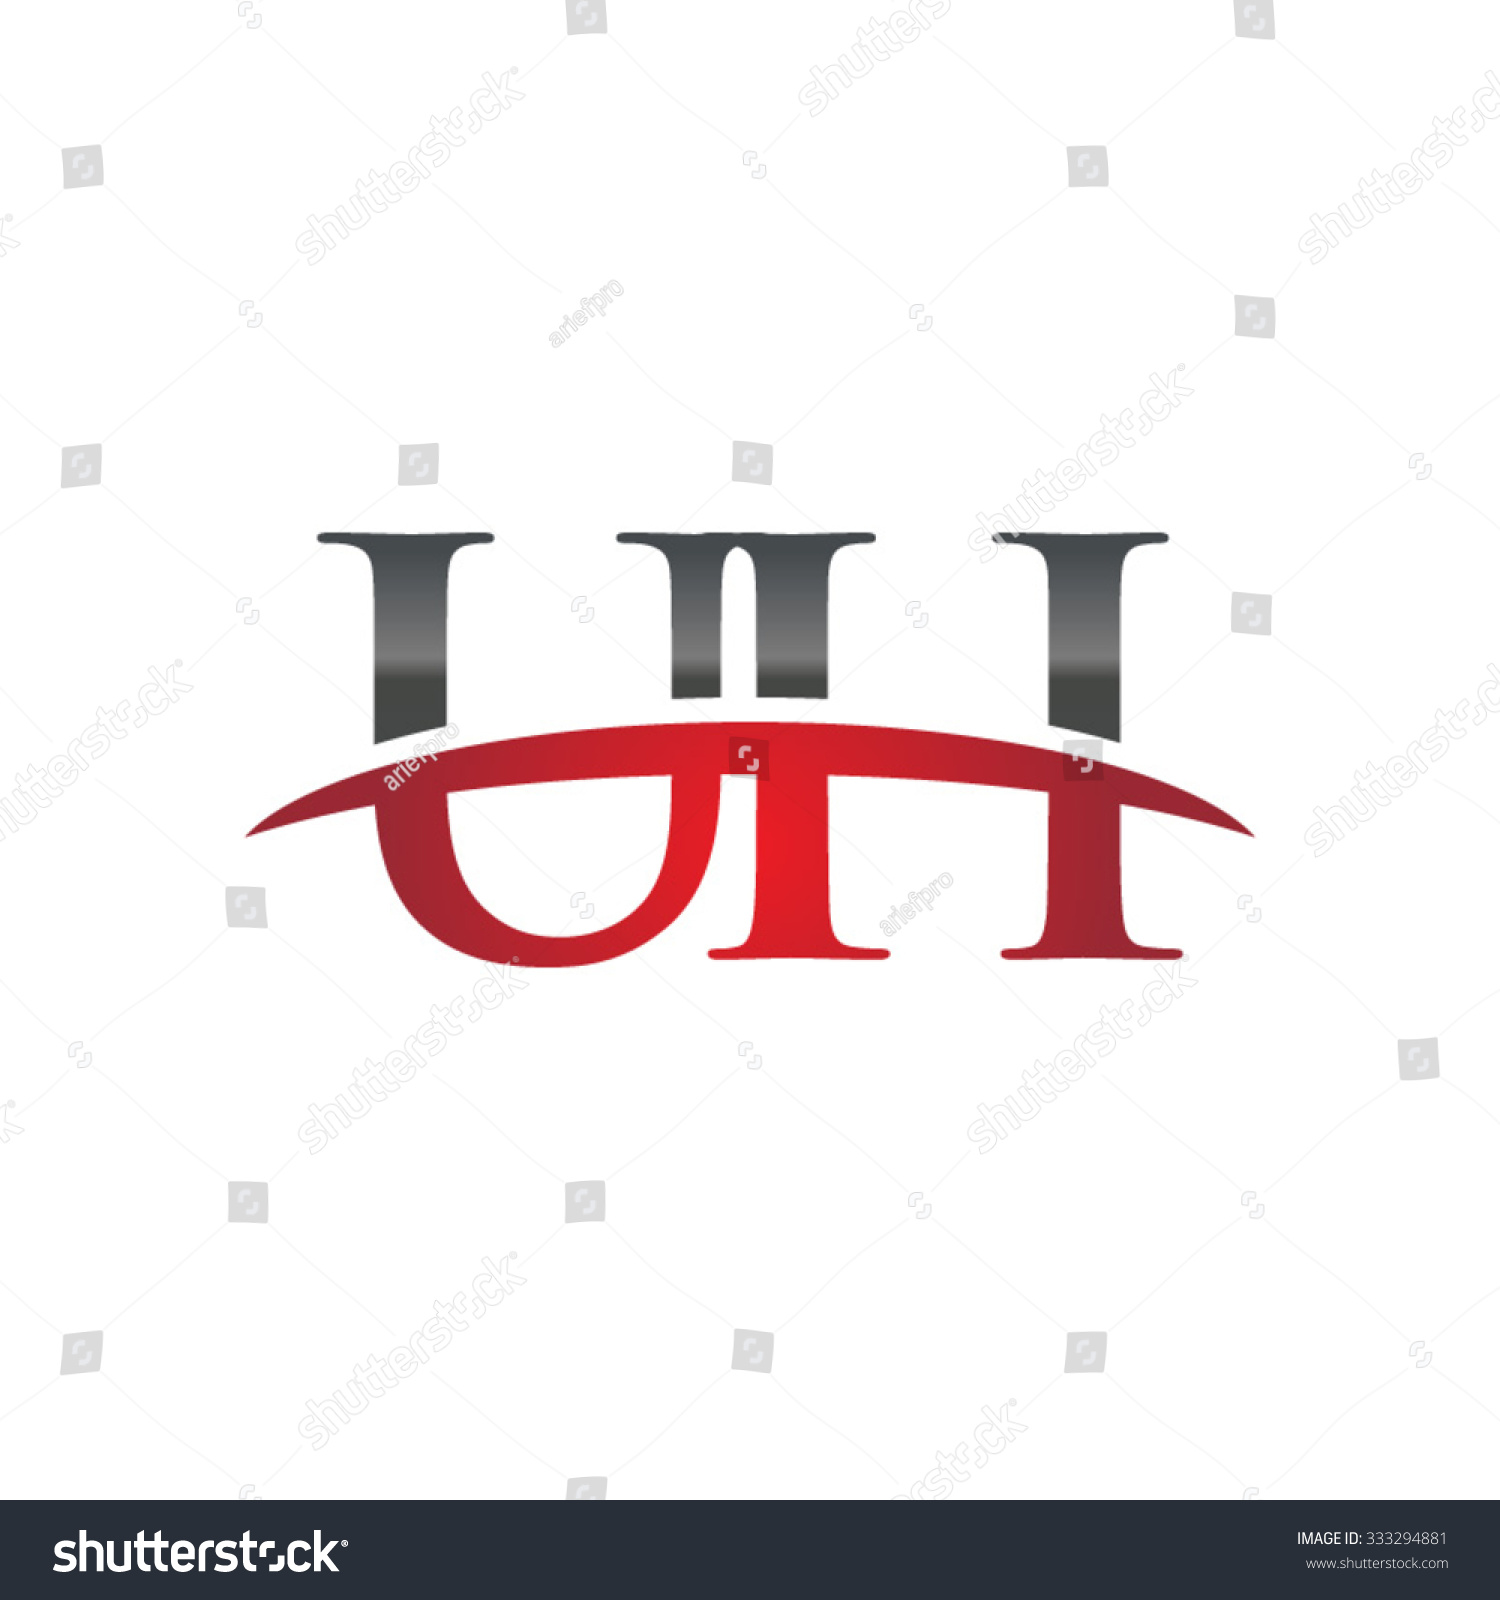 Uh Initial Company Red Swoosh Logo Stock Vector 333294881 - Shutterstock